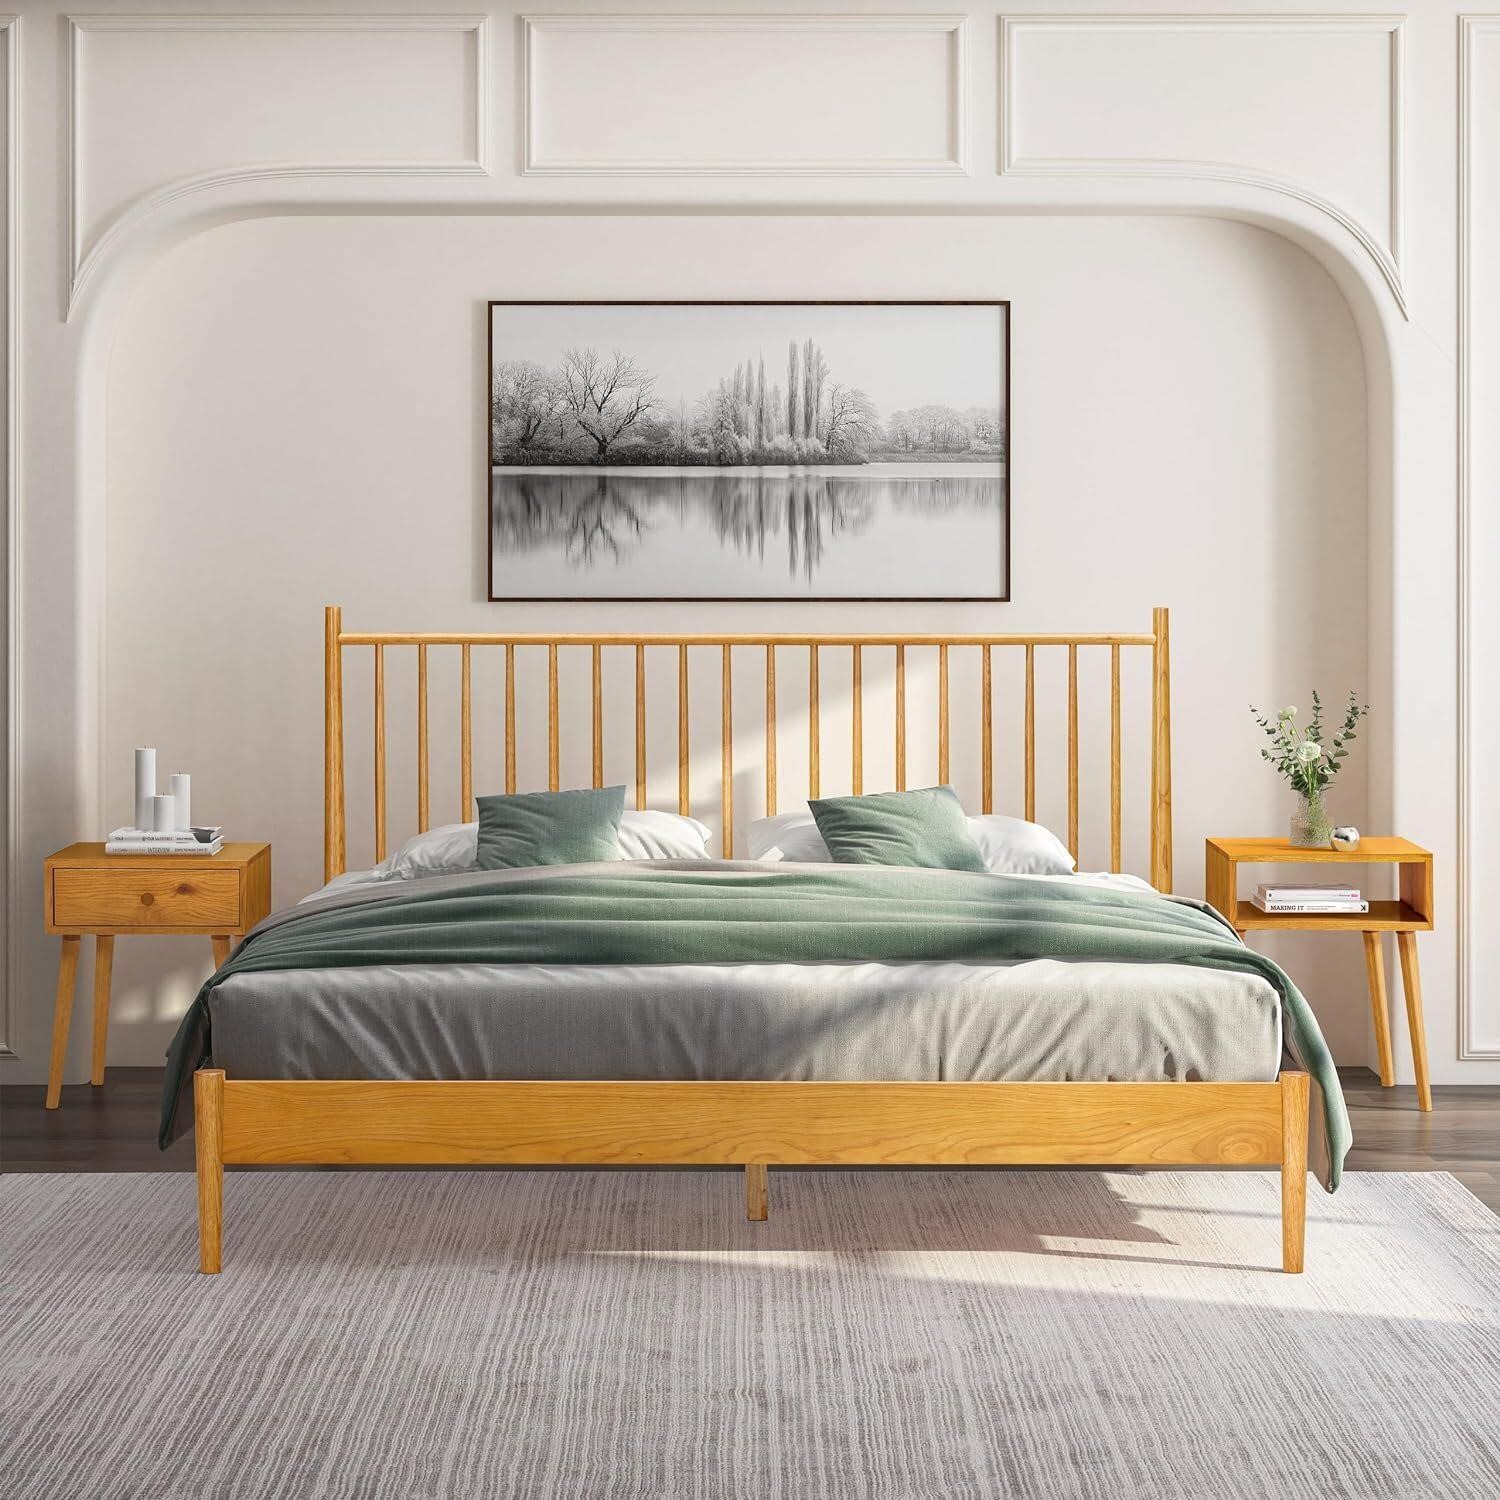 NTC Inno Wooden Bed Frame with Headboard